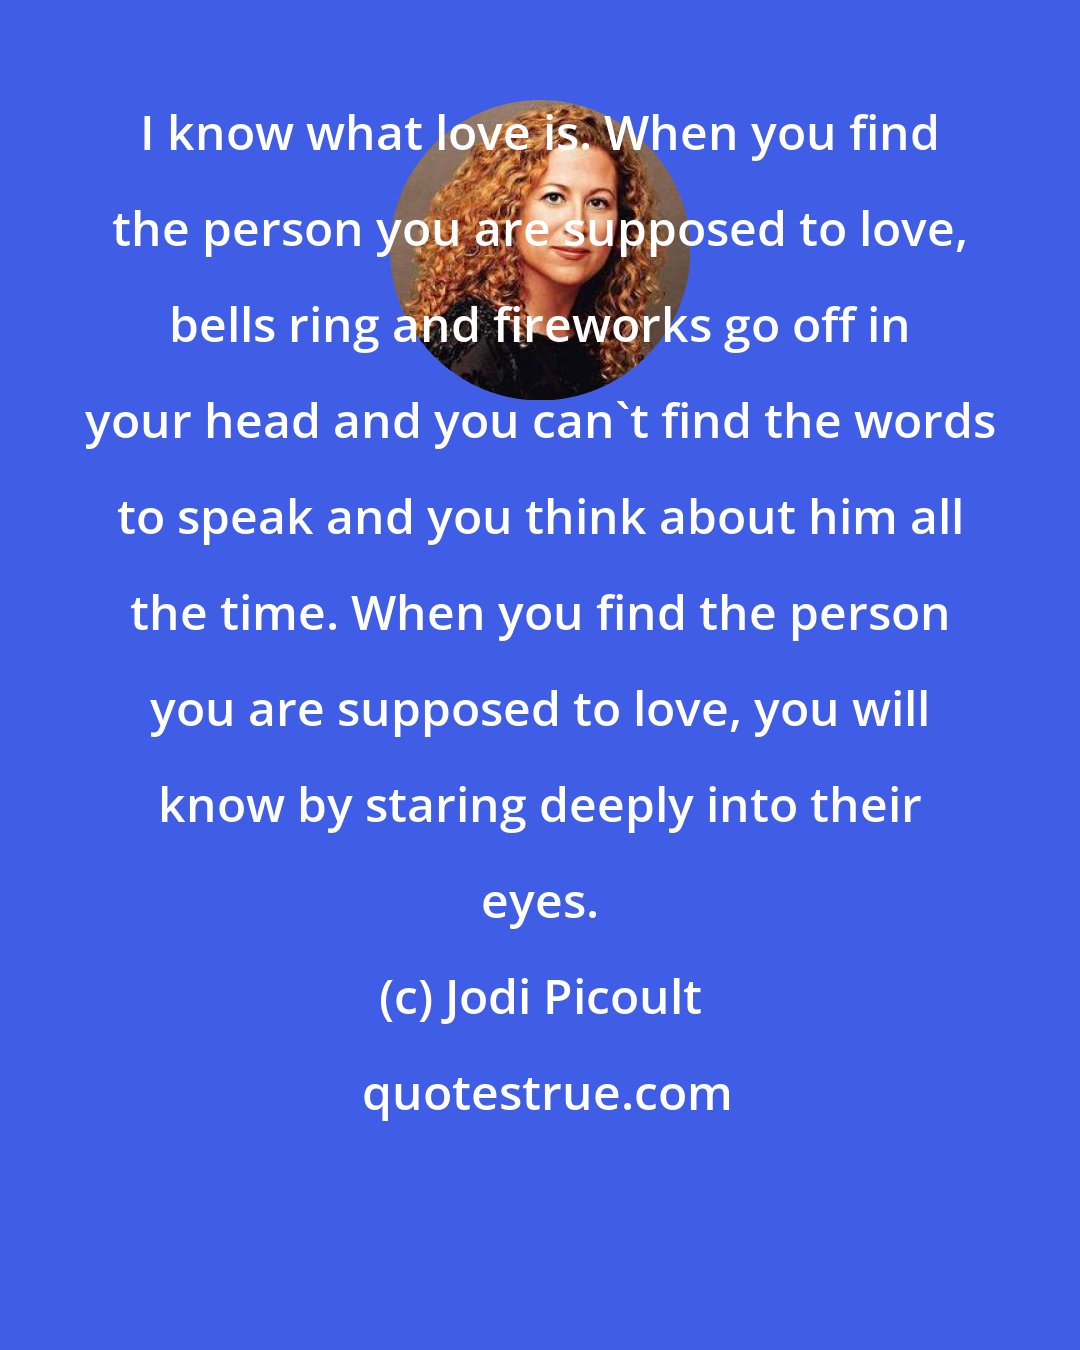 Jodi Picoult: I know what love is. When you find the person you are supposed to love, bells ring and fireworks go off in your head and you can't find the words to speak and you think about him all the time. When you find the person you are supposed to love, you will know by staring deeply into their eyes.